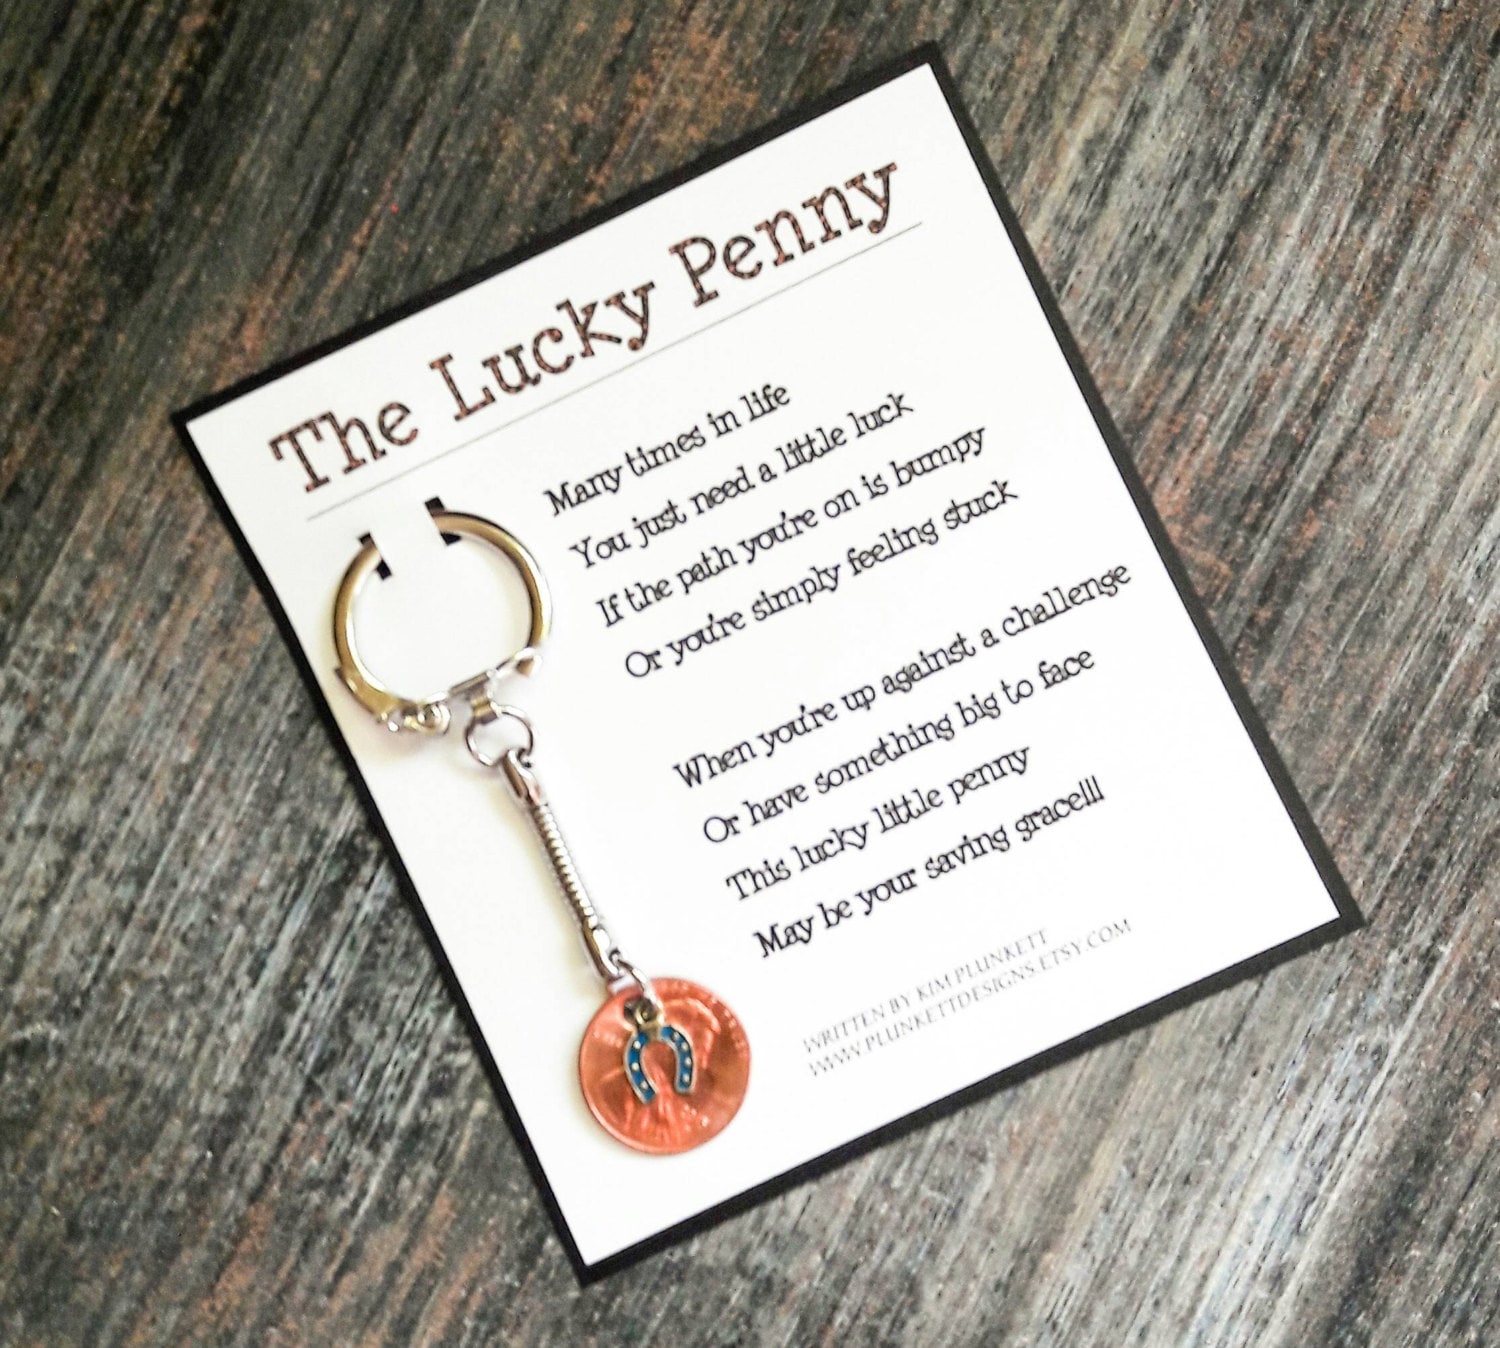 The Lucky Penny Original Poem And Keychain Shown With Blue